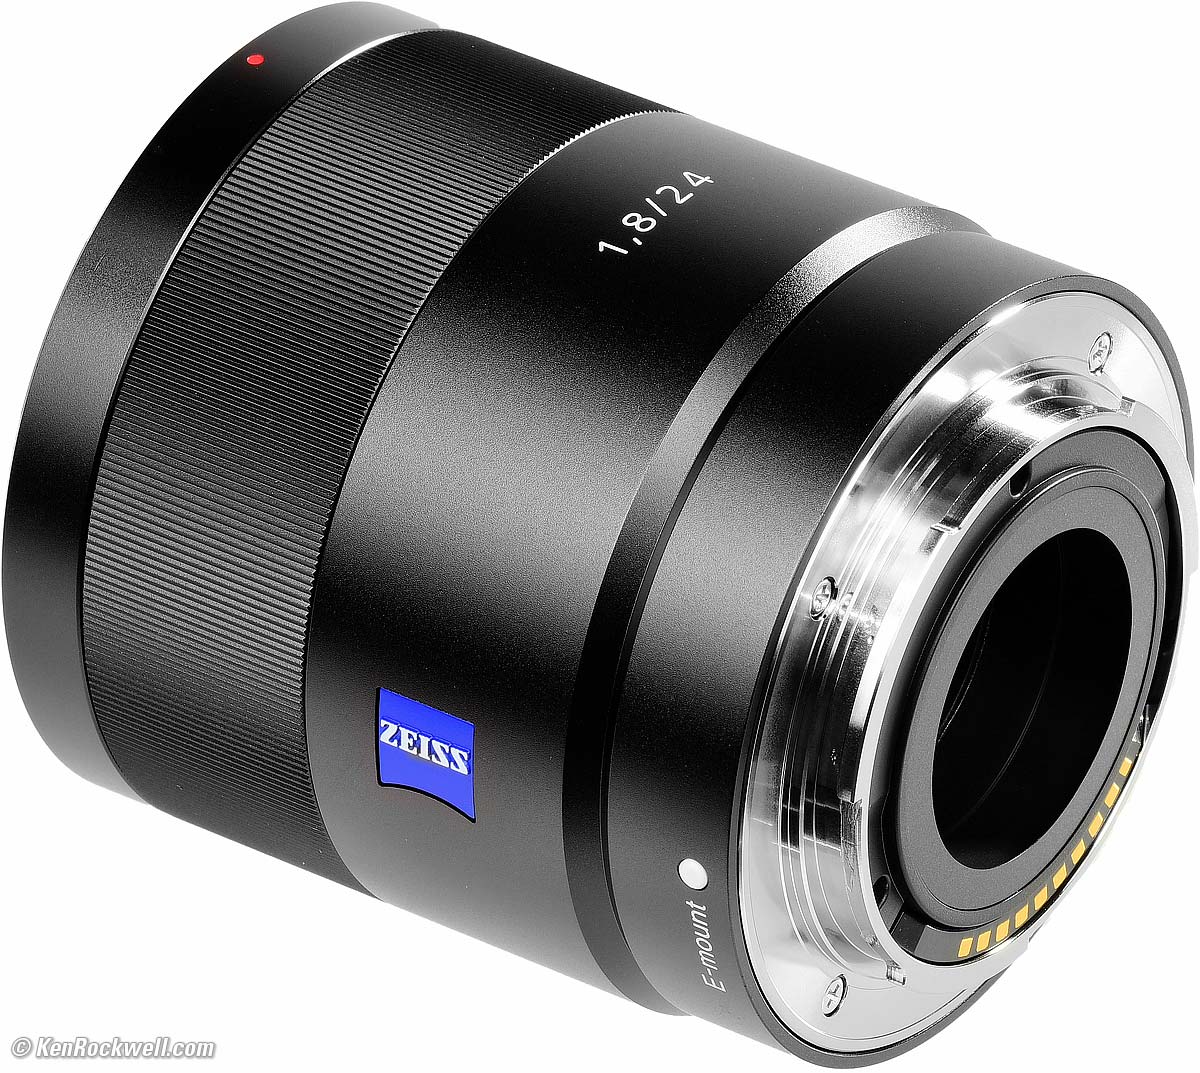 Decompose Skim Premature Sony Zeiss 24mm f/1.8 Review